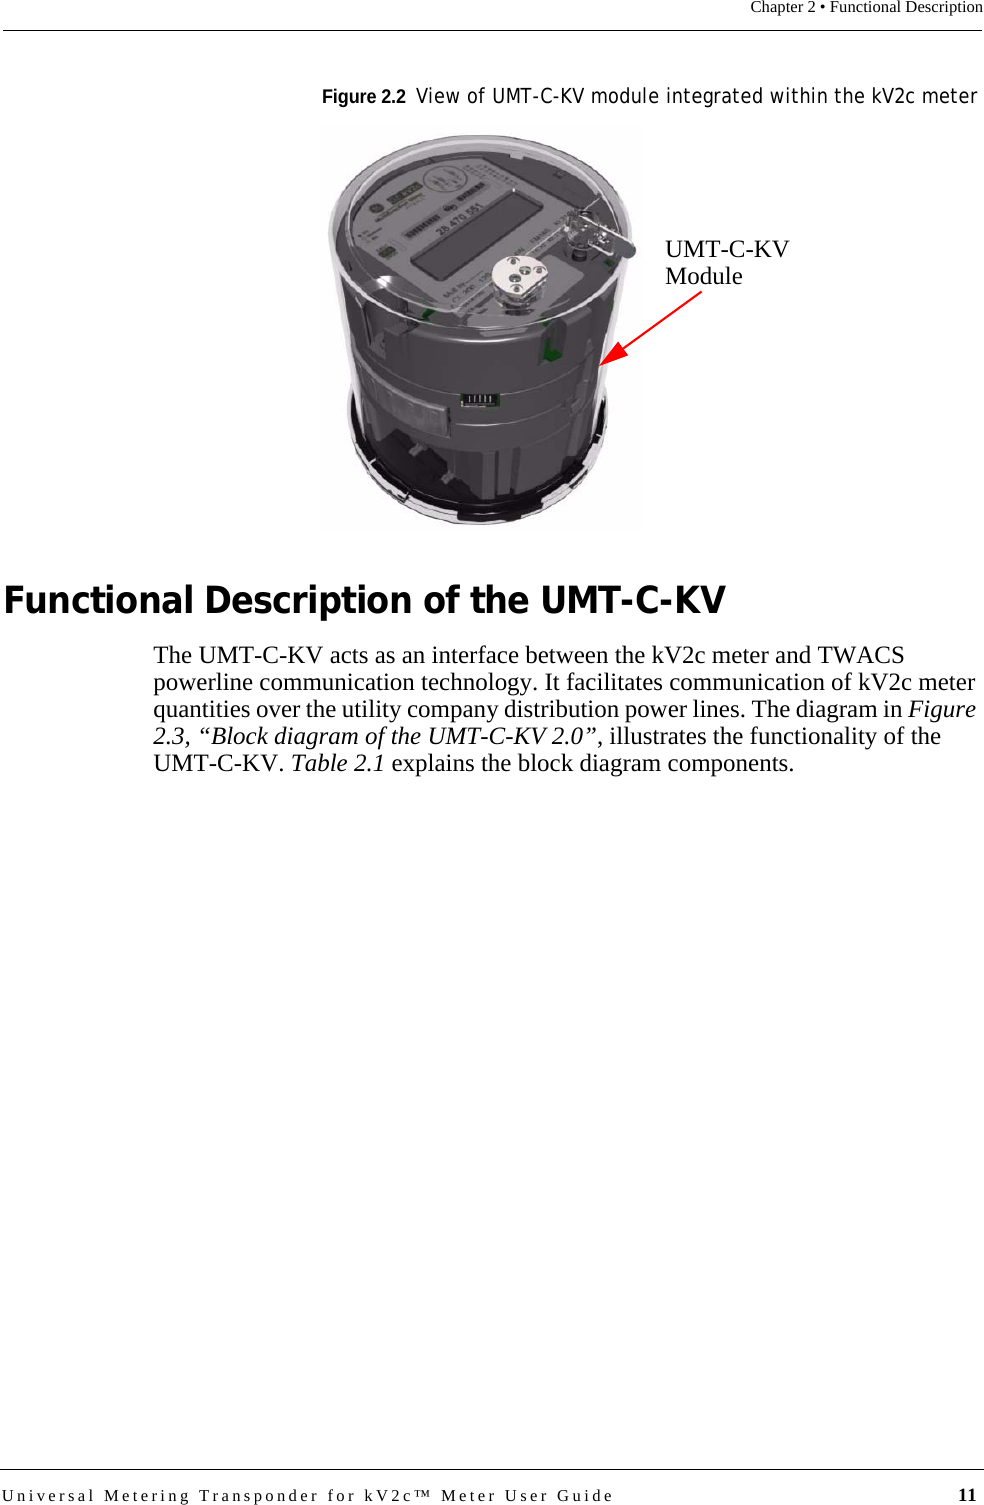 Universal Metering Transponder for kV2c™ Meter User Guide  11Chapter 2 • Functional DescriptionFigure 2.2  View of UMT-C-KV module integrated within the kV2c meterFunctional Description of the UMT-C-KVThe UMT-C-KV acts as an interface between the kV2c meter and TWACS powerline communication technology. It facilitates communication of kV2c meter quantities over the utility company distribution power lines. The diagram in Figure 2.3, “Block diagram of the UMT-C-KV 2.0”, illustrates the functionality of the UMT-C-KV. Table 2.1 explains the block diagram components.UMT-C-KVModule